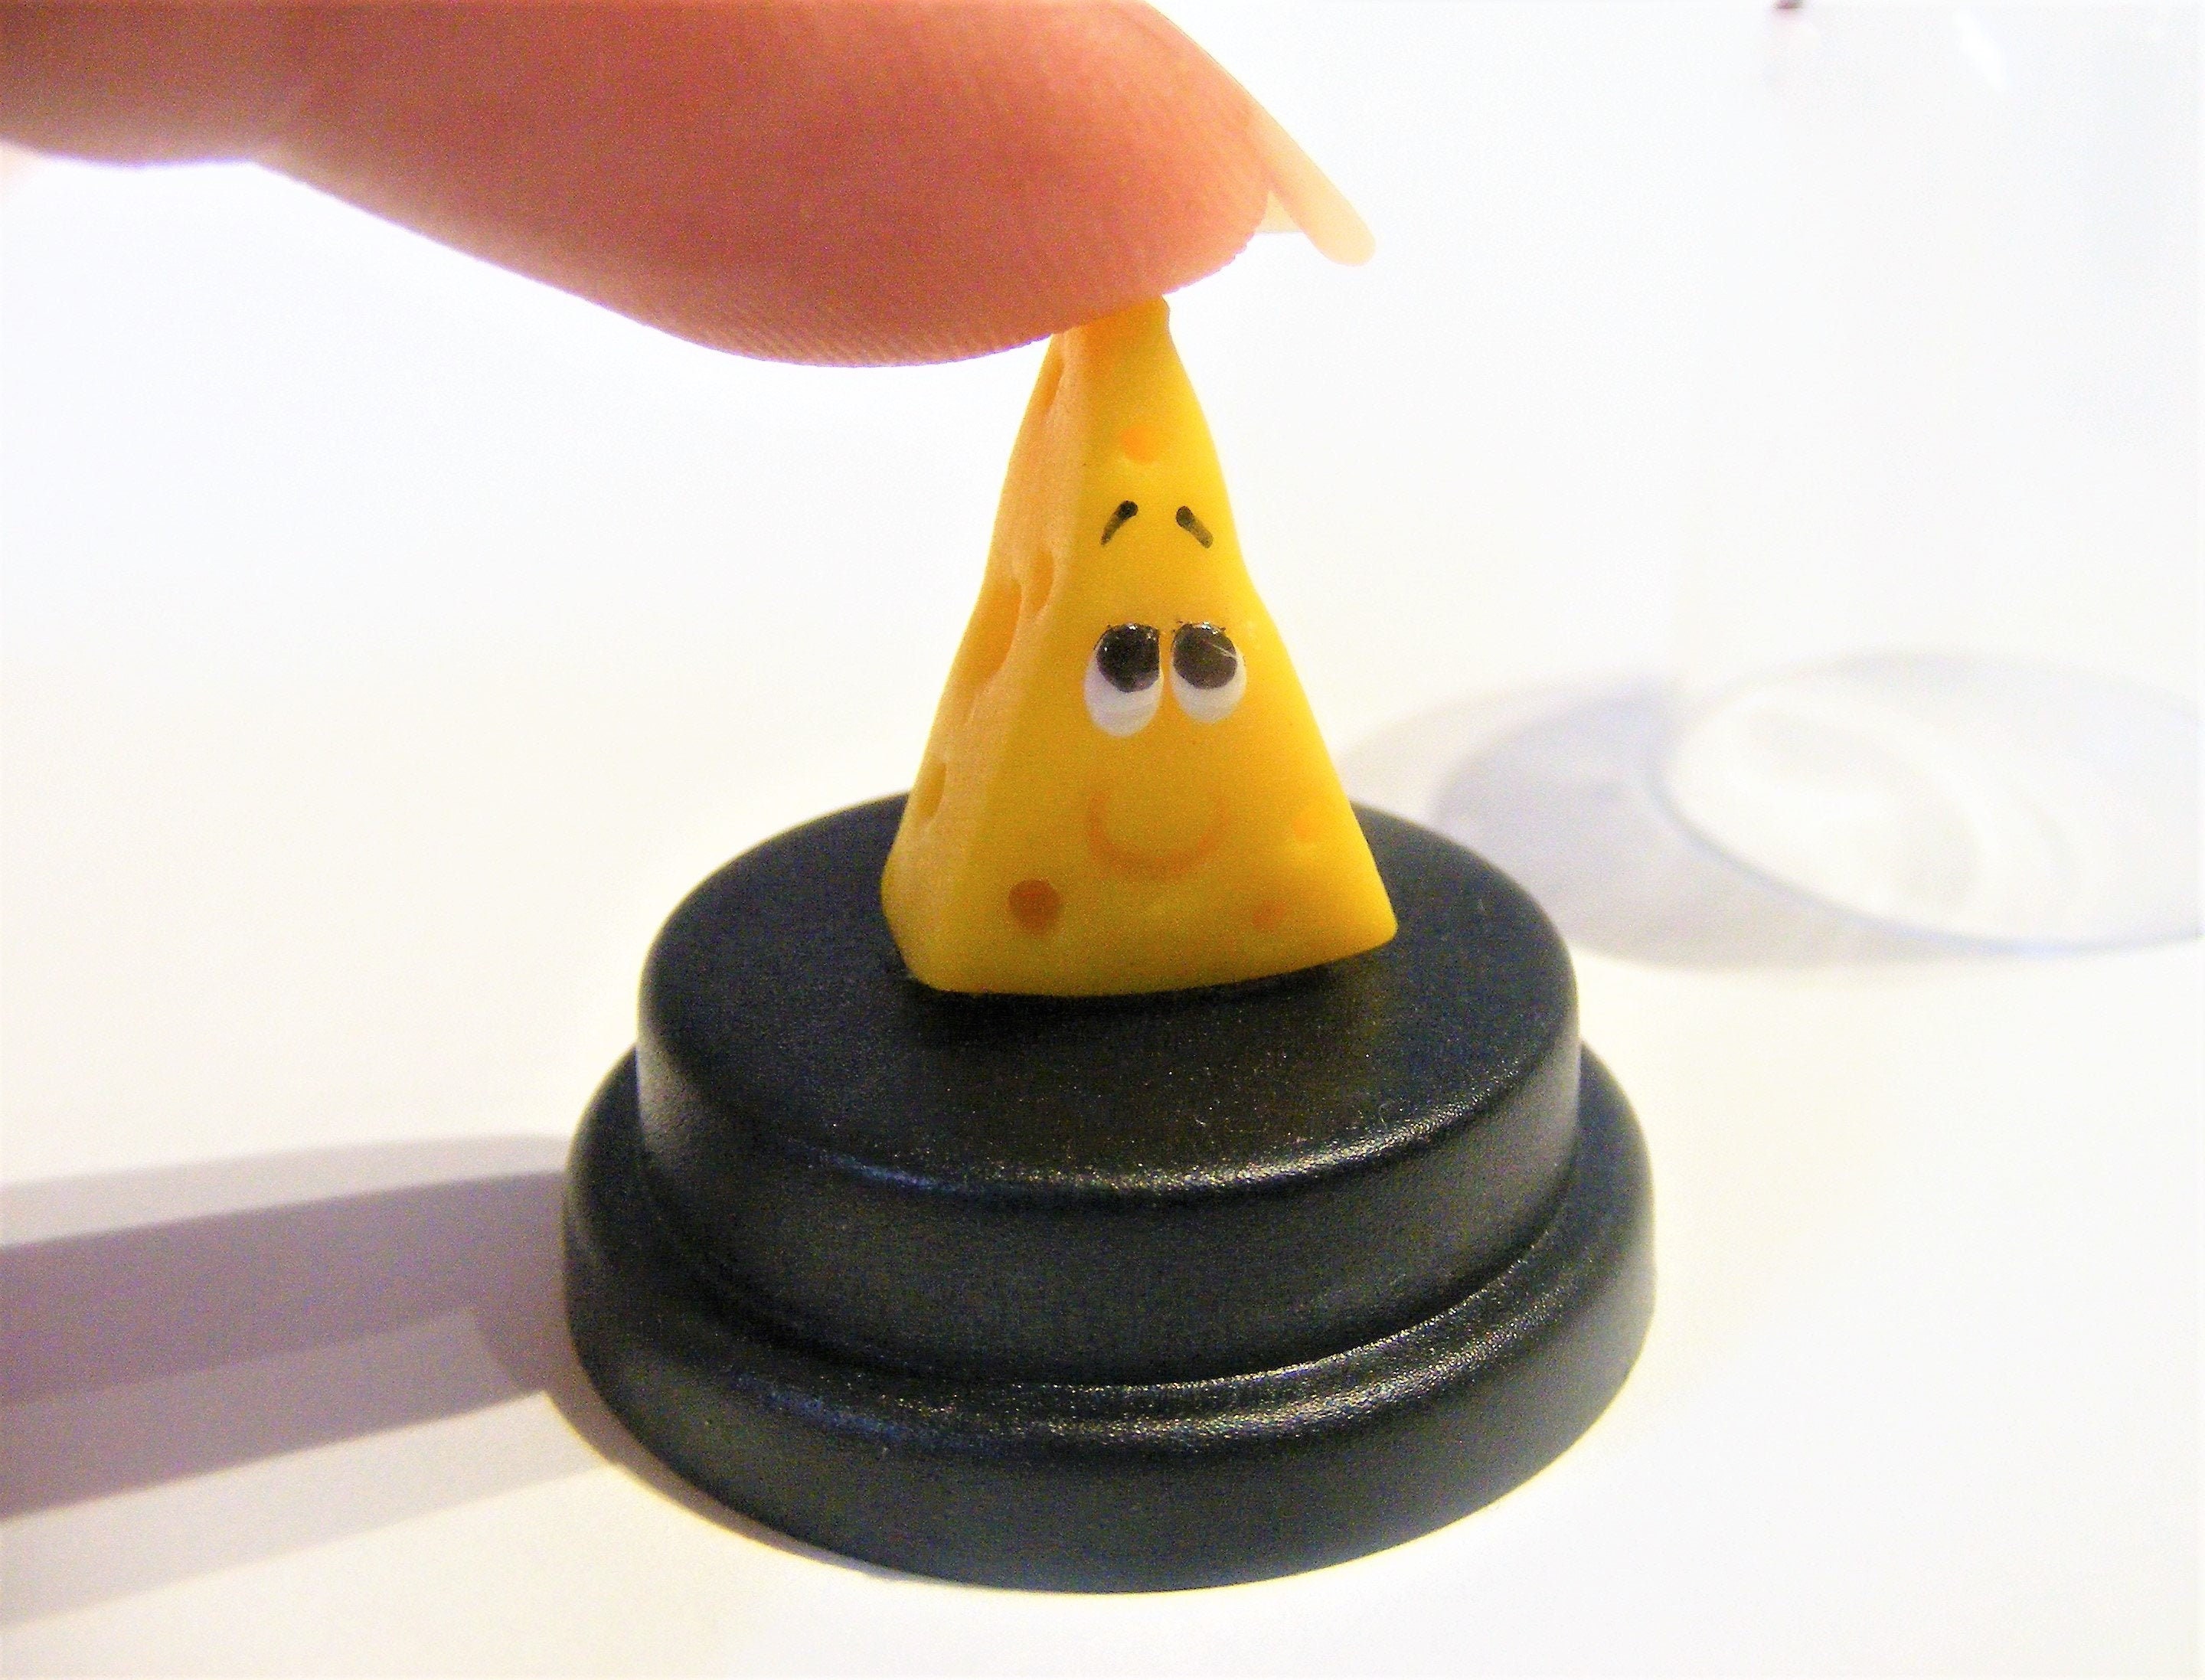 Tiny Smiling Cheese Slice Friend